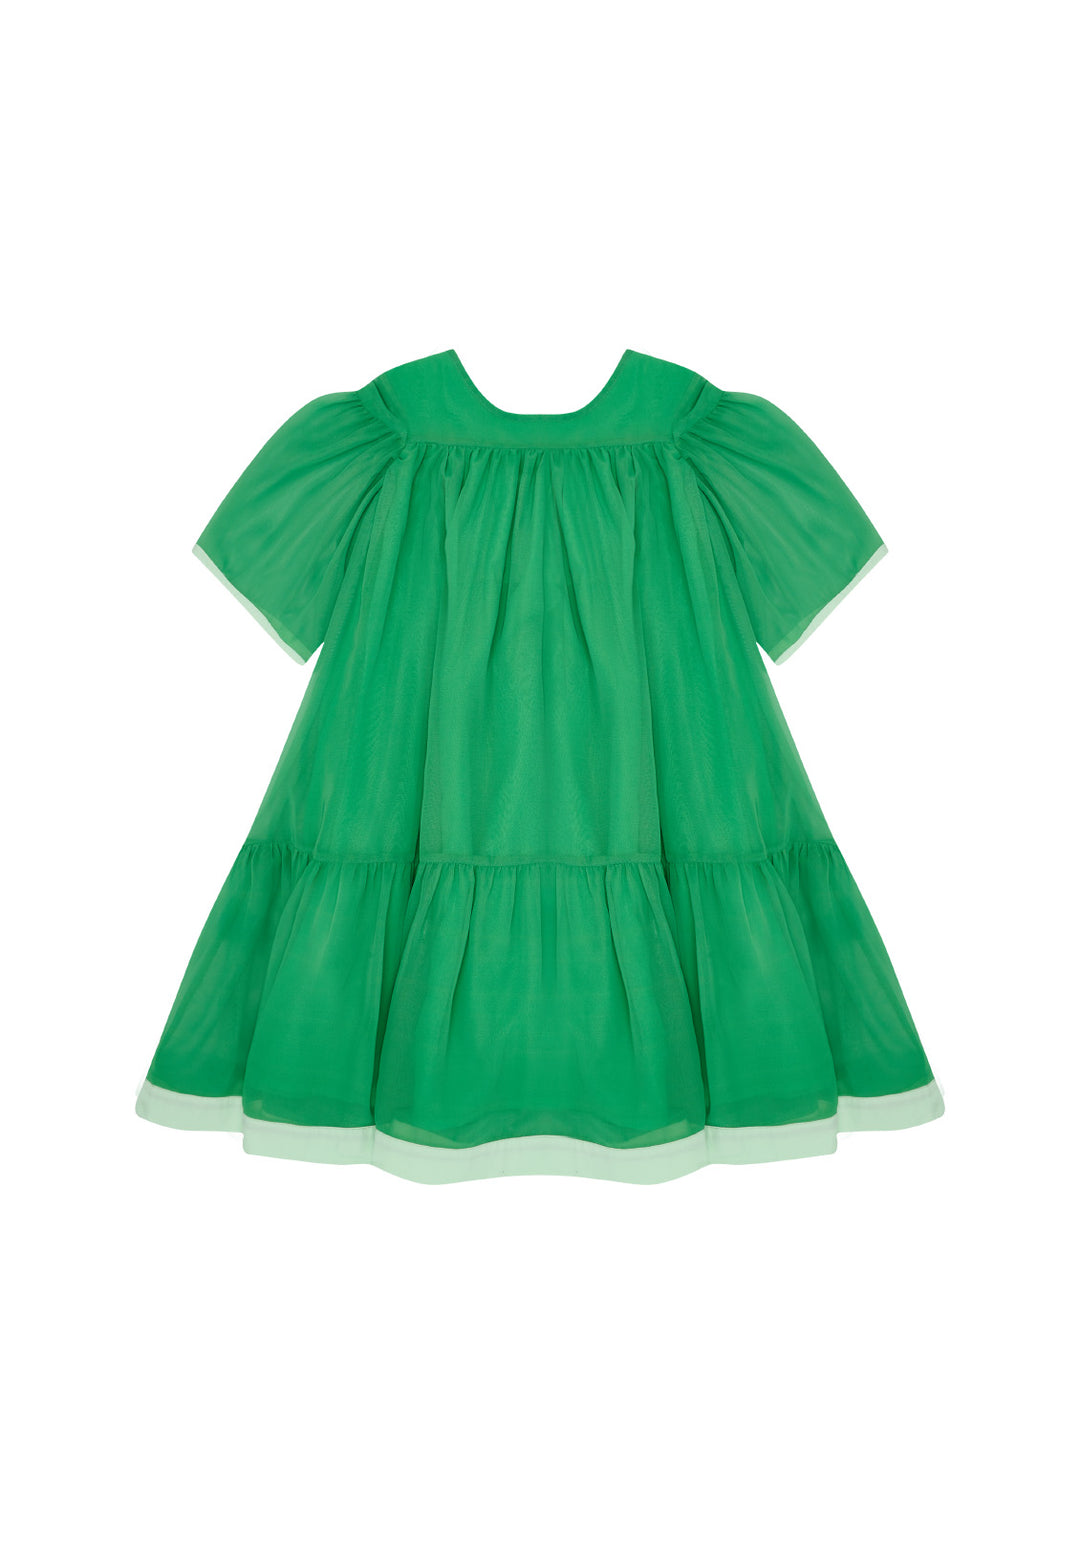 FLOAT YOUR BOAT DRESS-CRICKET GREEN